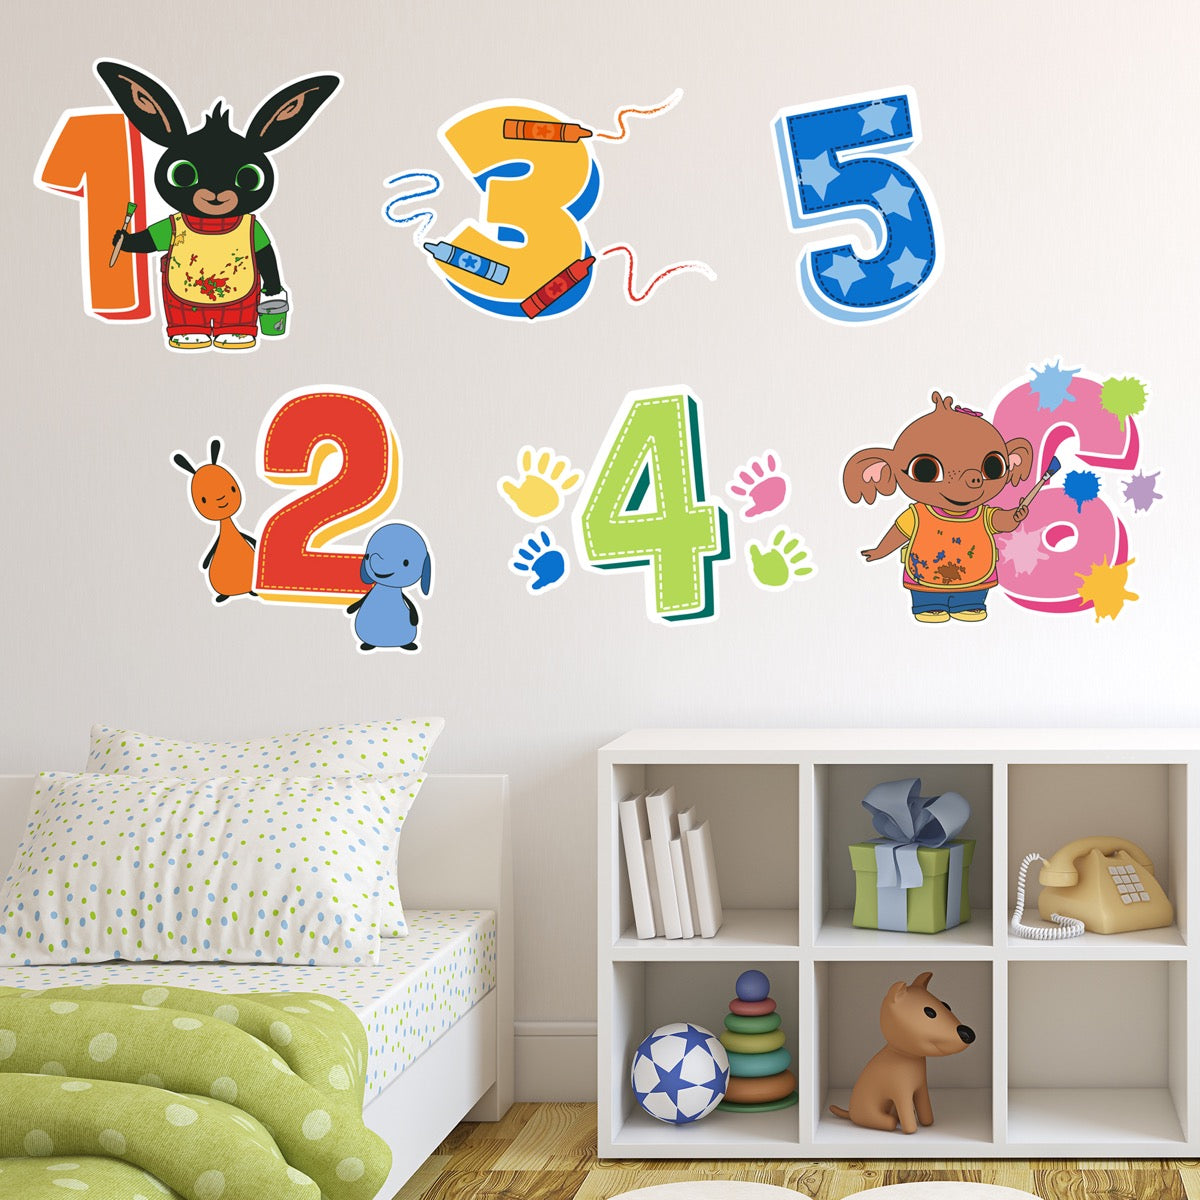 Bing Wall Sticker - Bing and Friends Counting Numbers Wall Decal Set